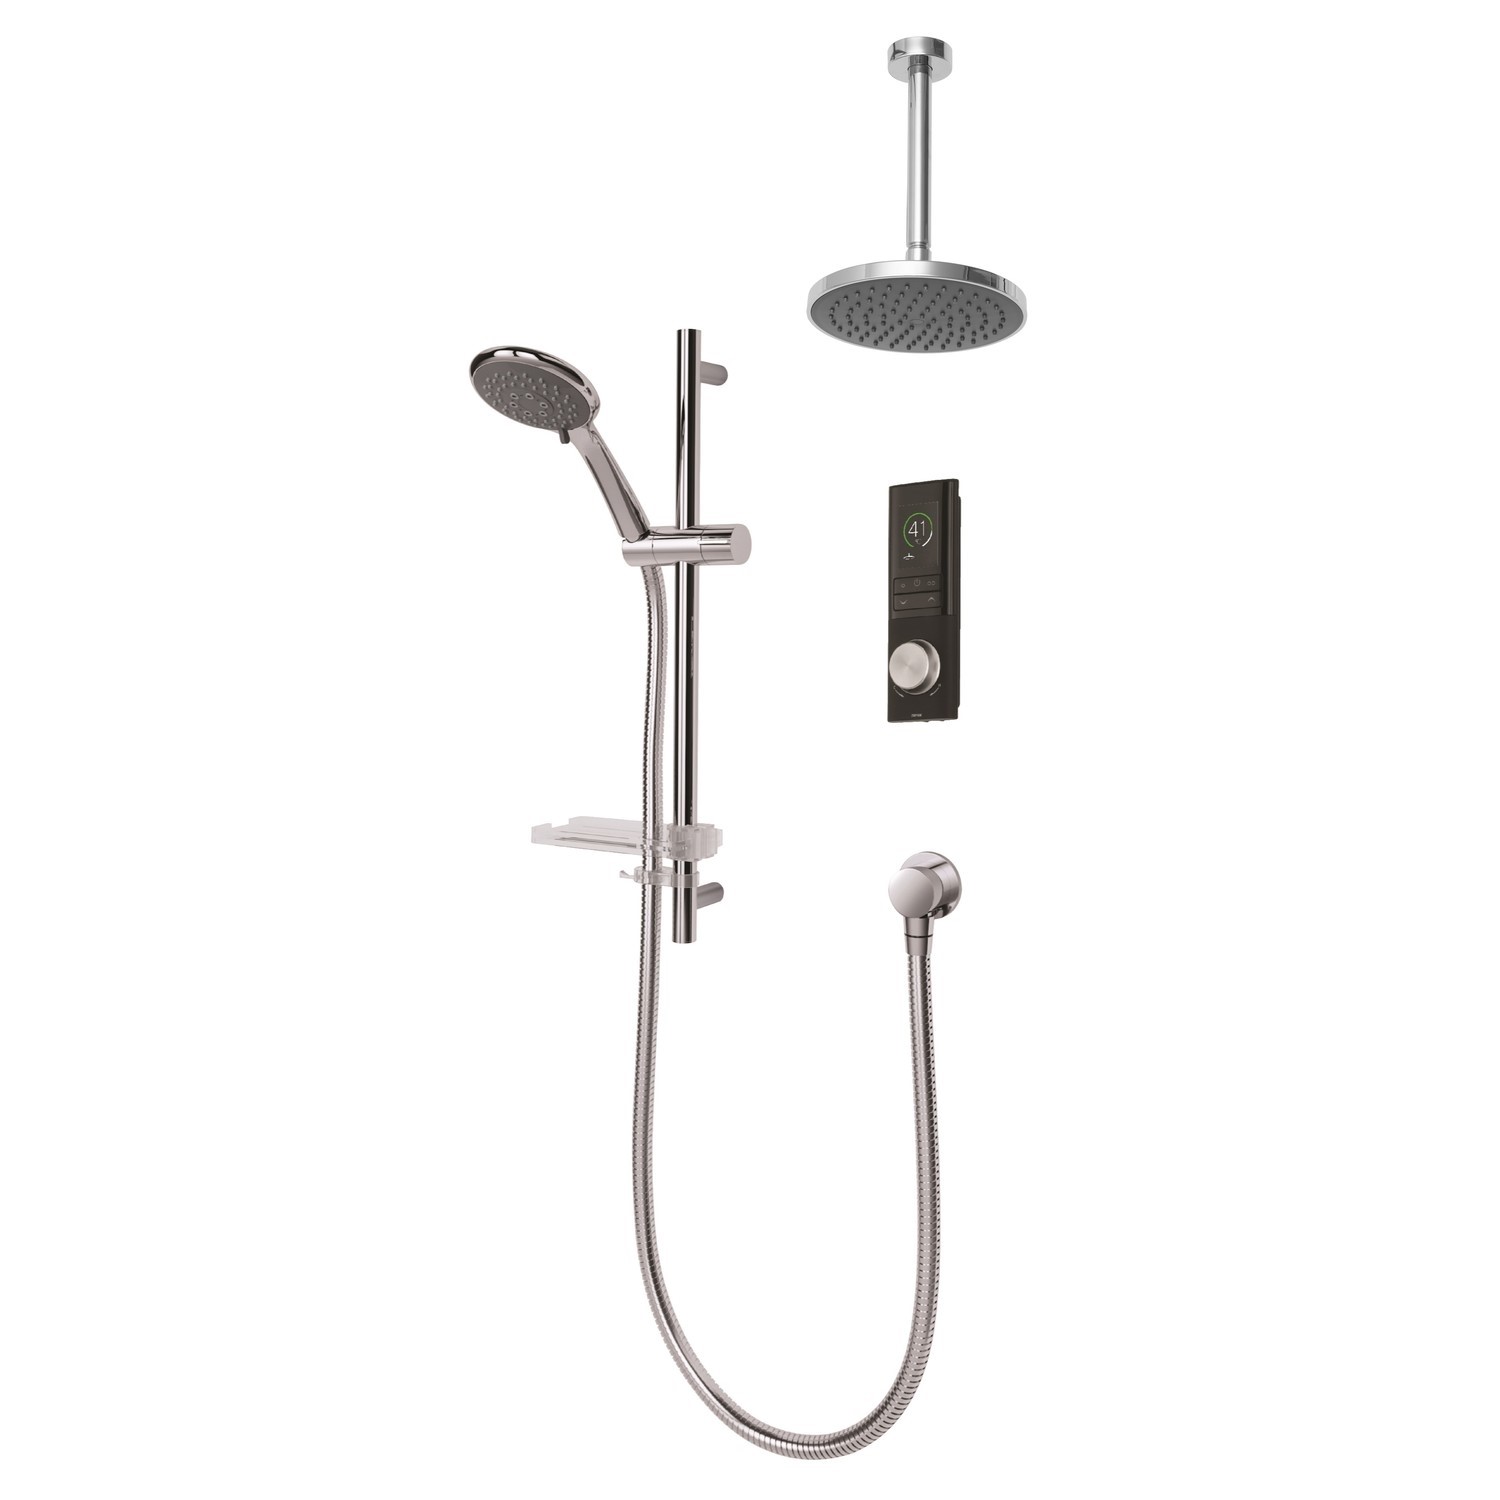 Triton Showers HOME Digital Mixer Shower with Diverter - Pumped